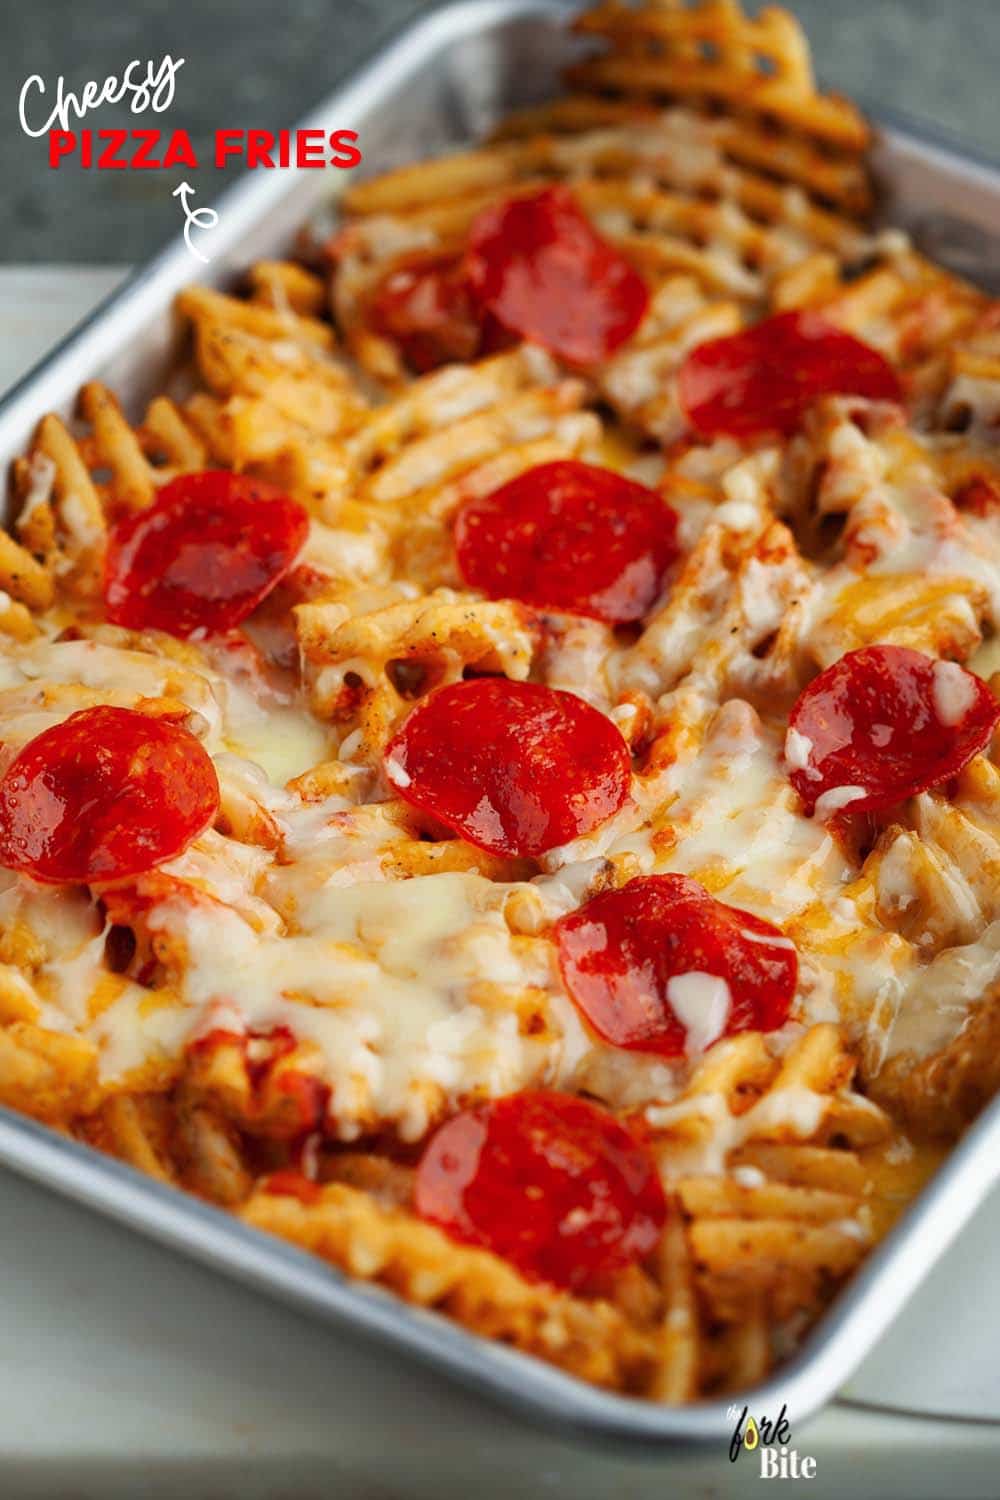 Making pizza fries is easy, but it shouldn't confine you to one set of toppings. You can broaden your taste and creativity with these fry-base and topping concepts.